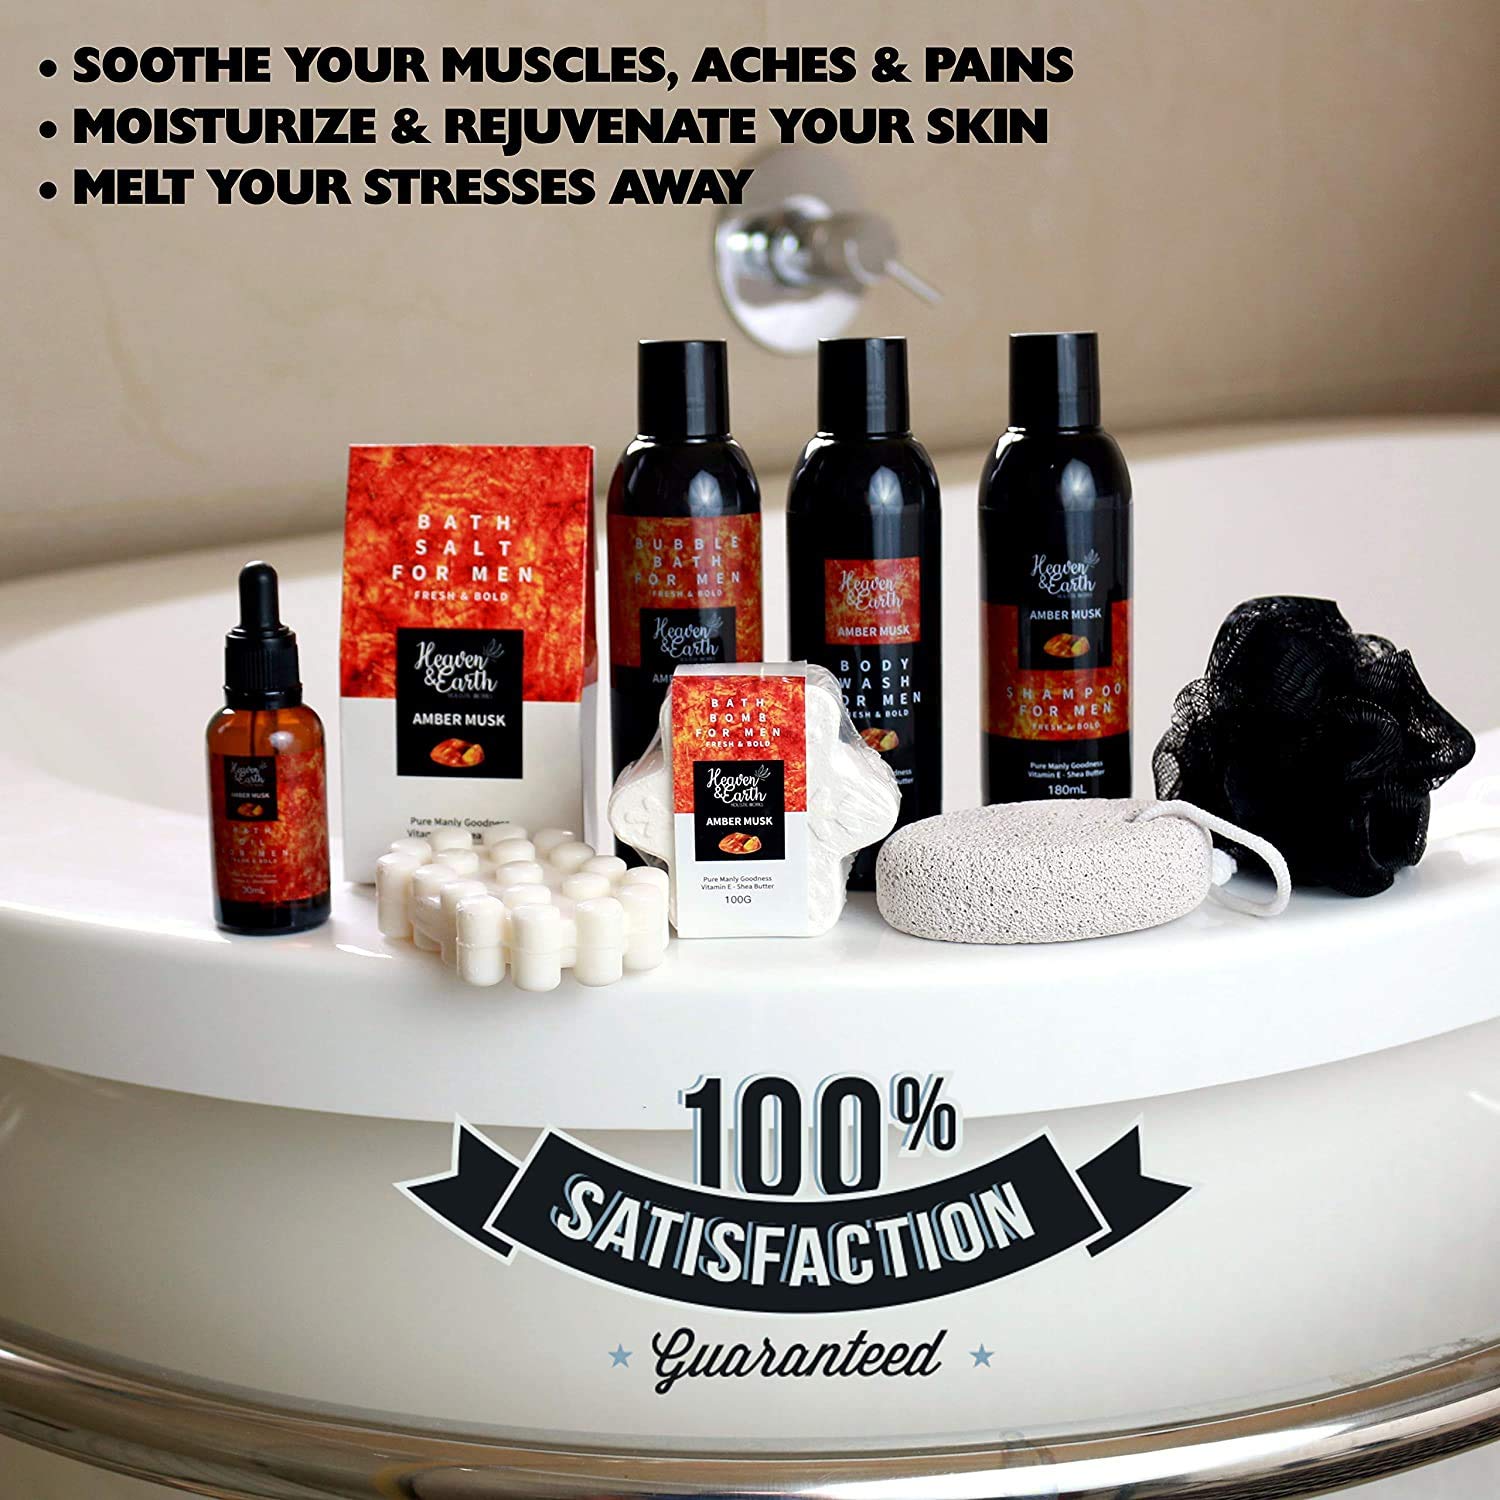 Men's Amber Musk Grooming Kit Luxury Bath and Body Gifts Spa